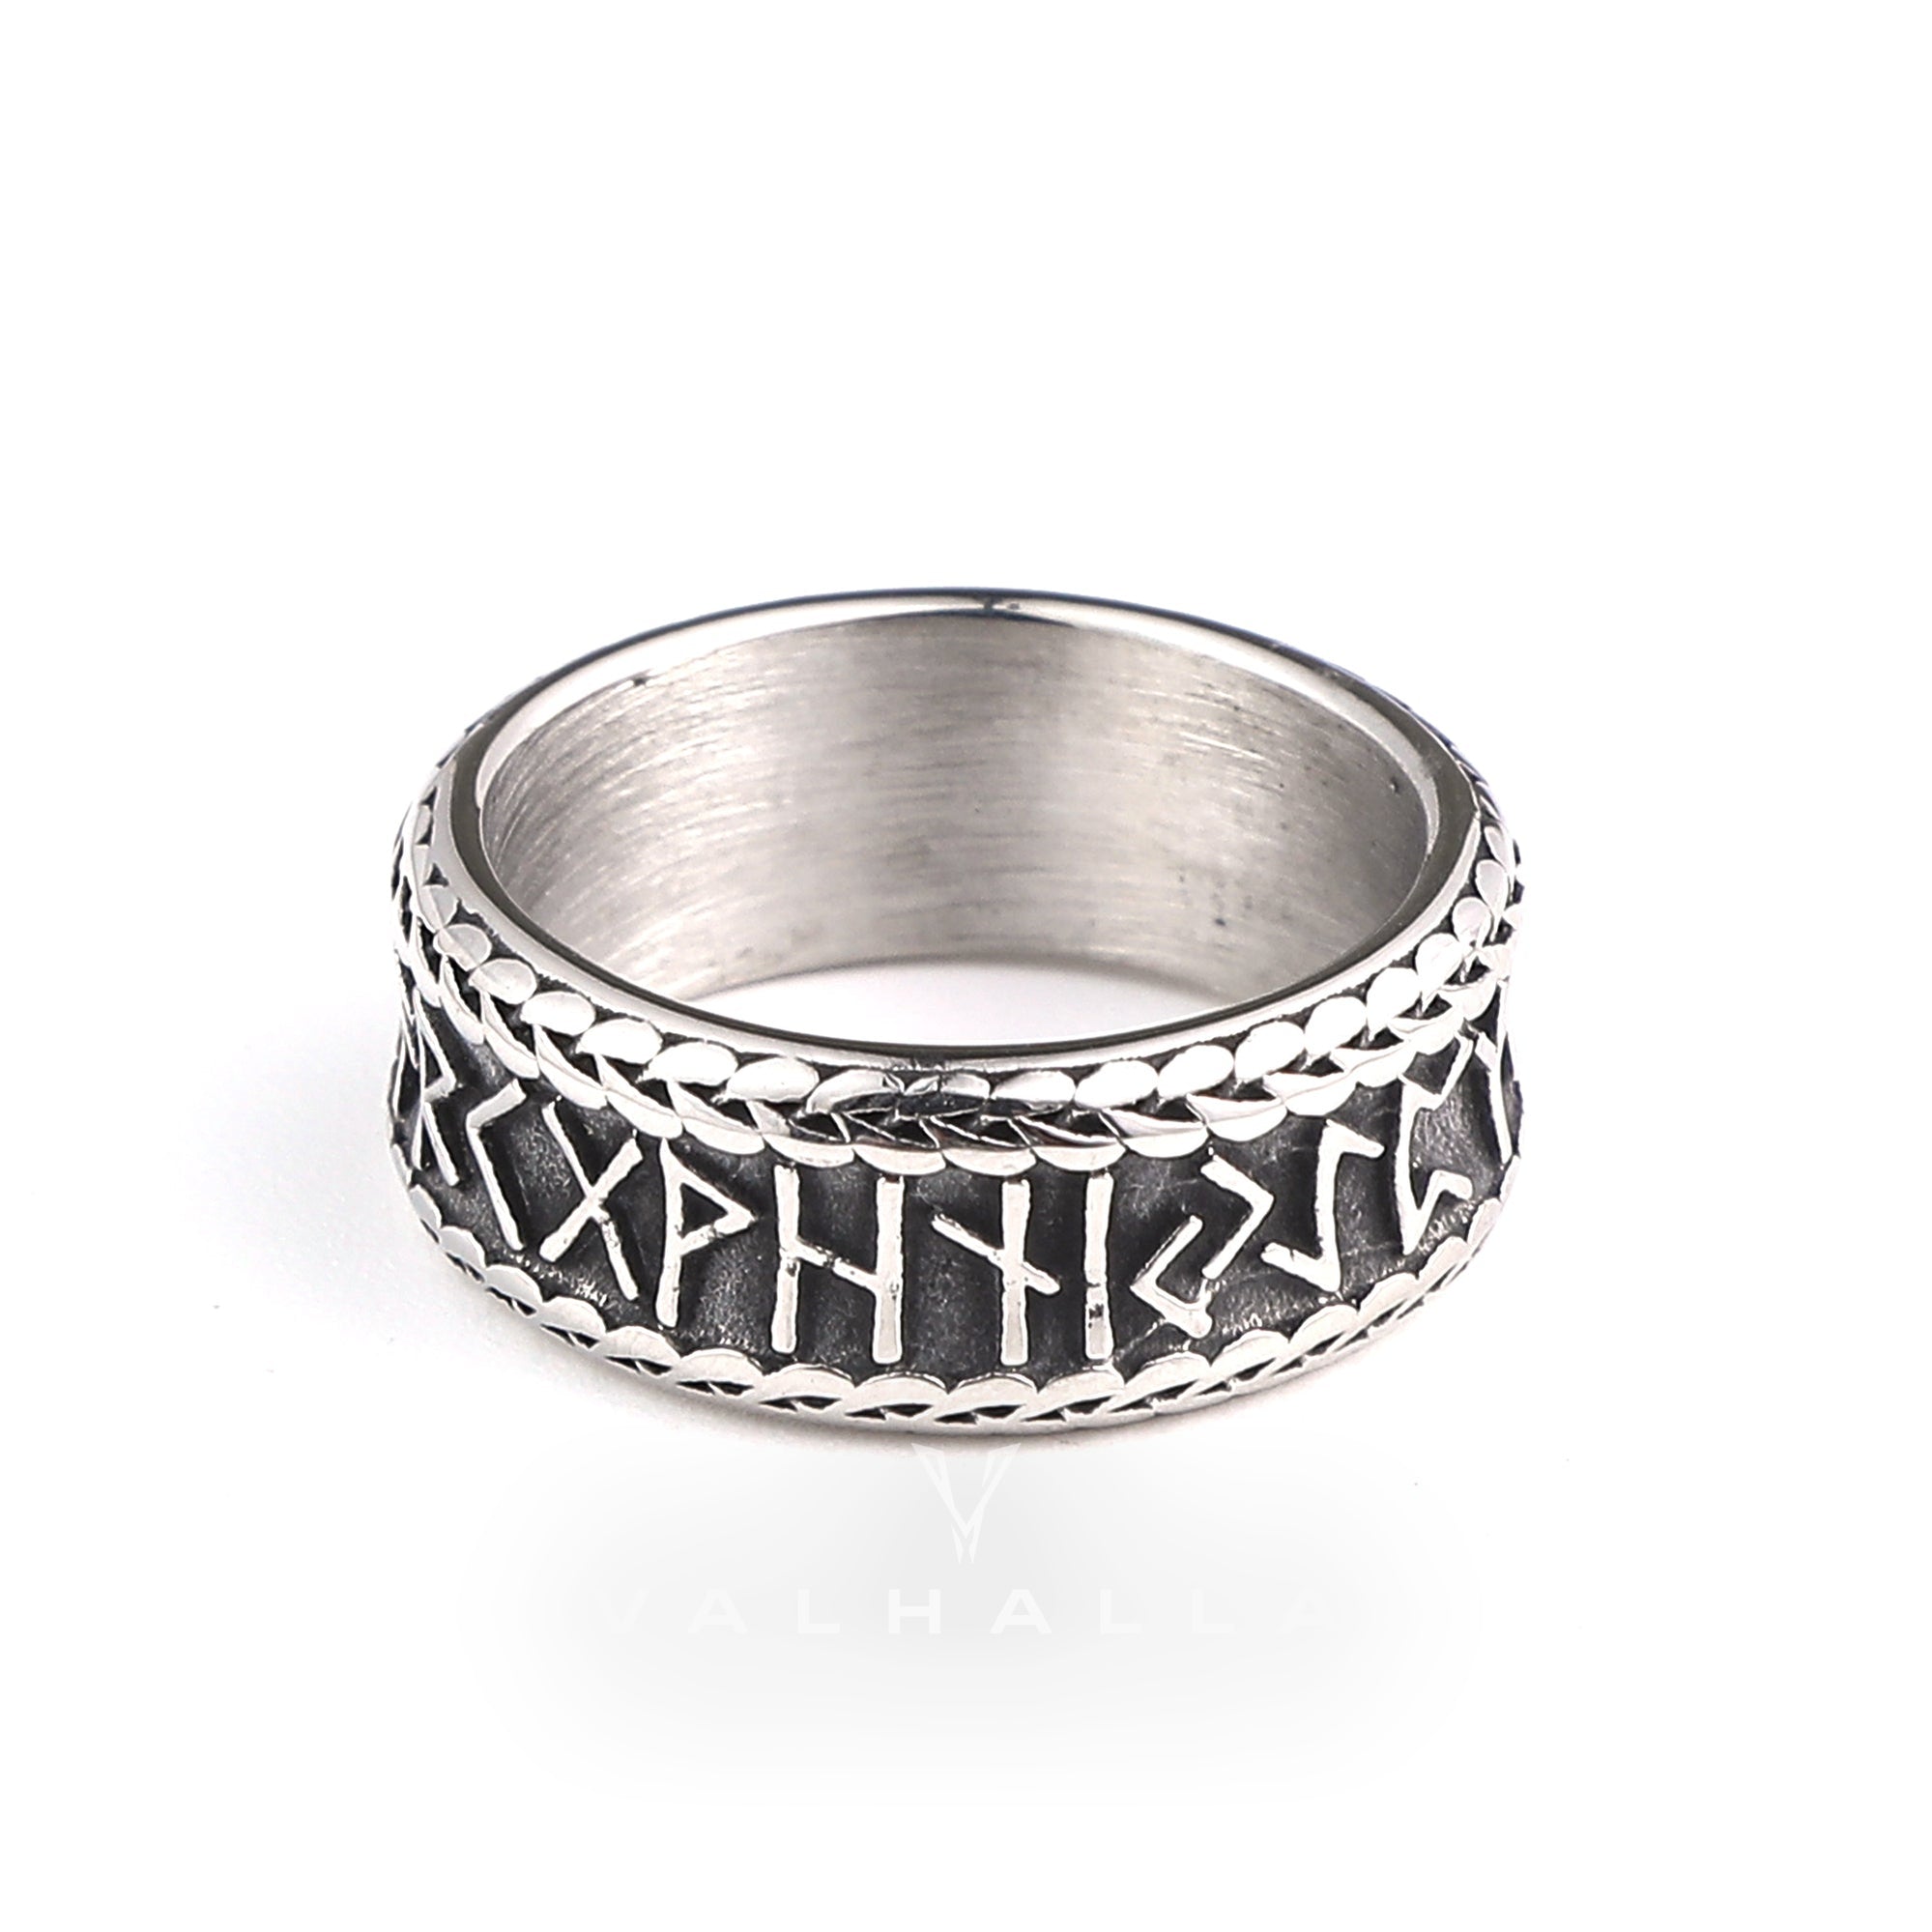 Handcrafted Stainless Steel Rune and Knotwork Ring